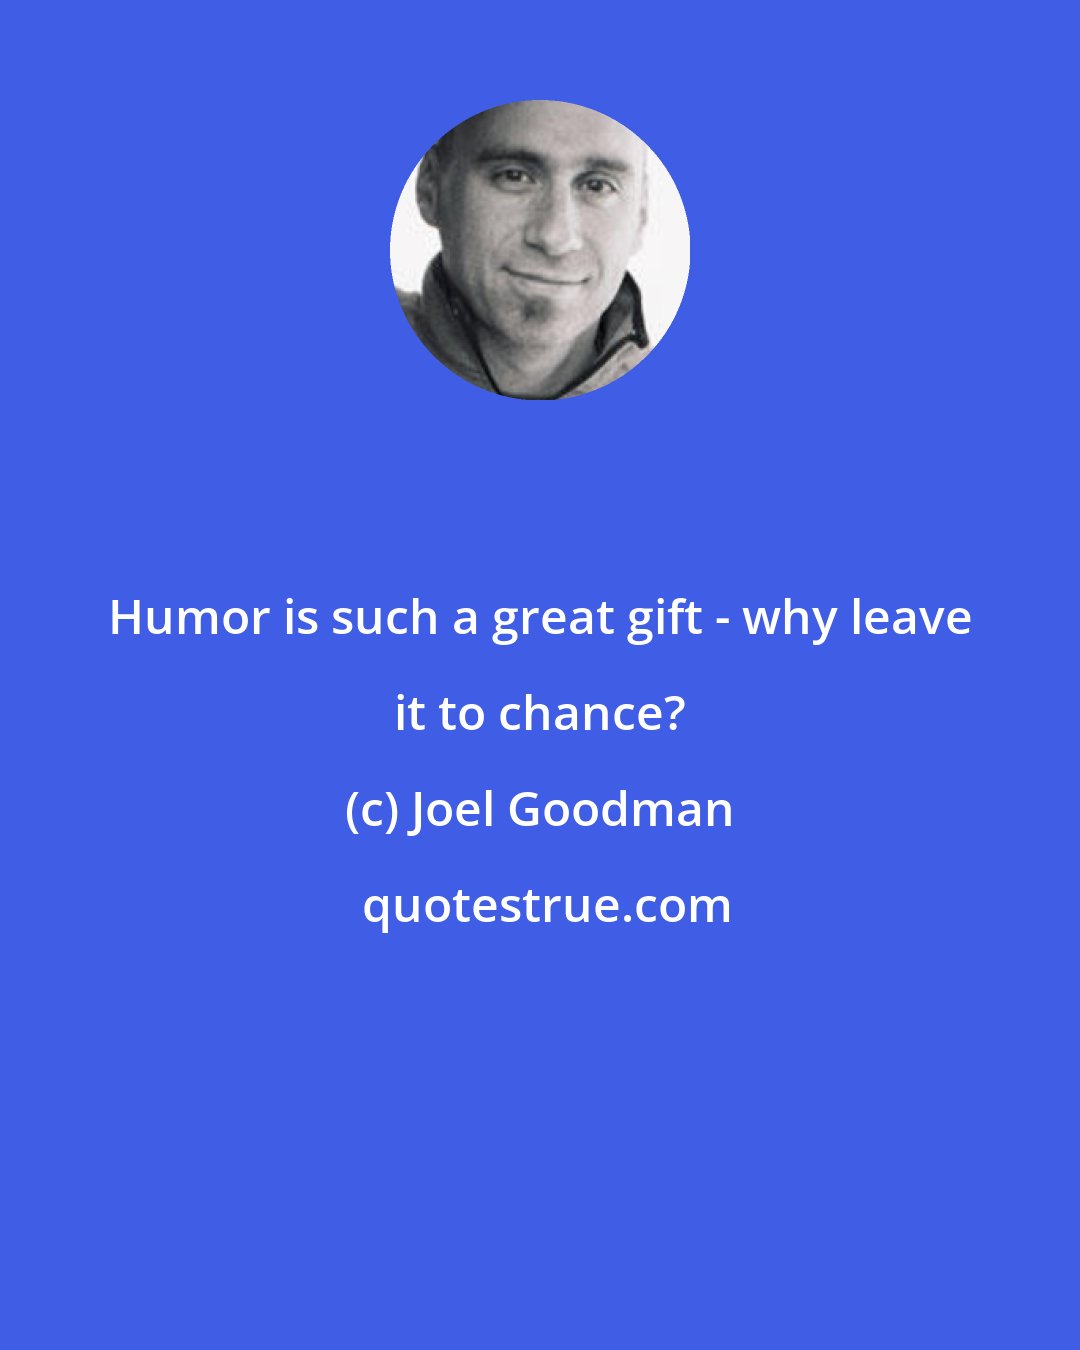 Joel Goodman: Humor is such a great gift - why leave it to chance?